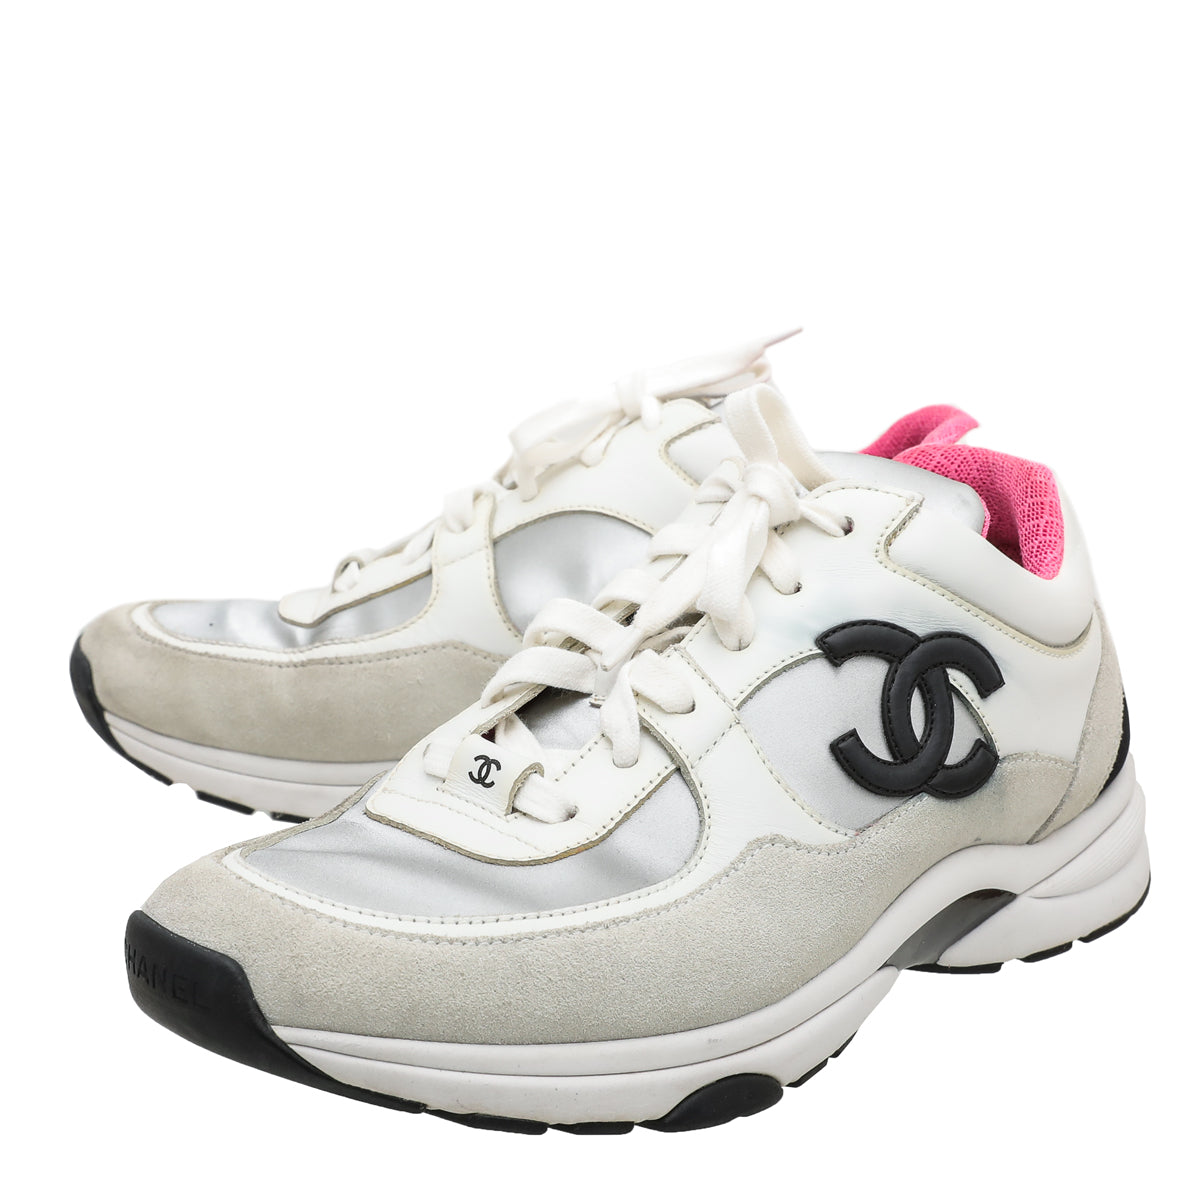 CHANEL, Shoes, Chanel Whitesilver Sneakers